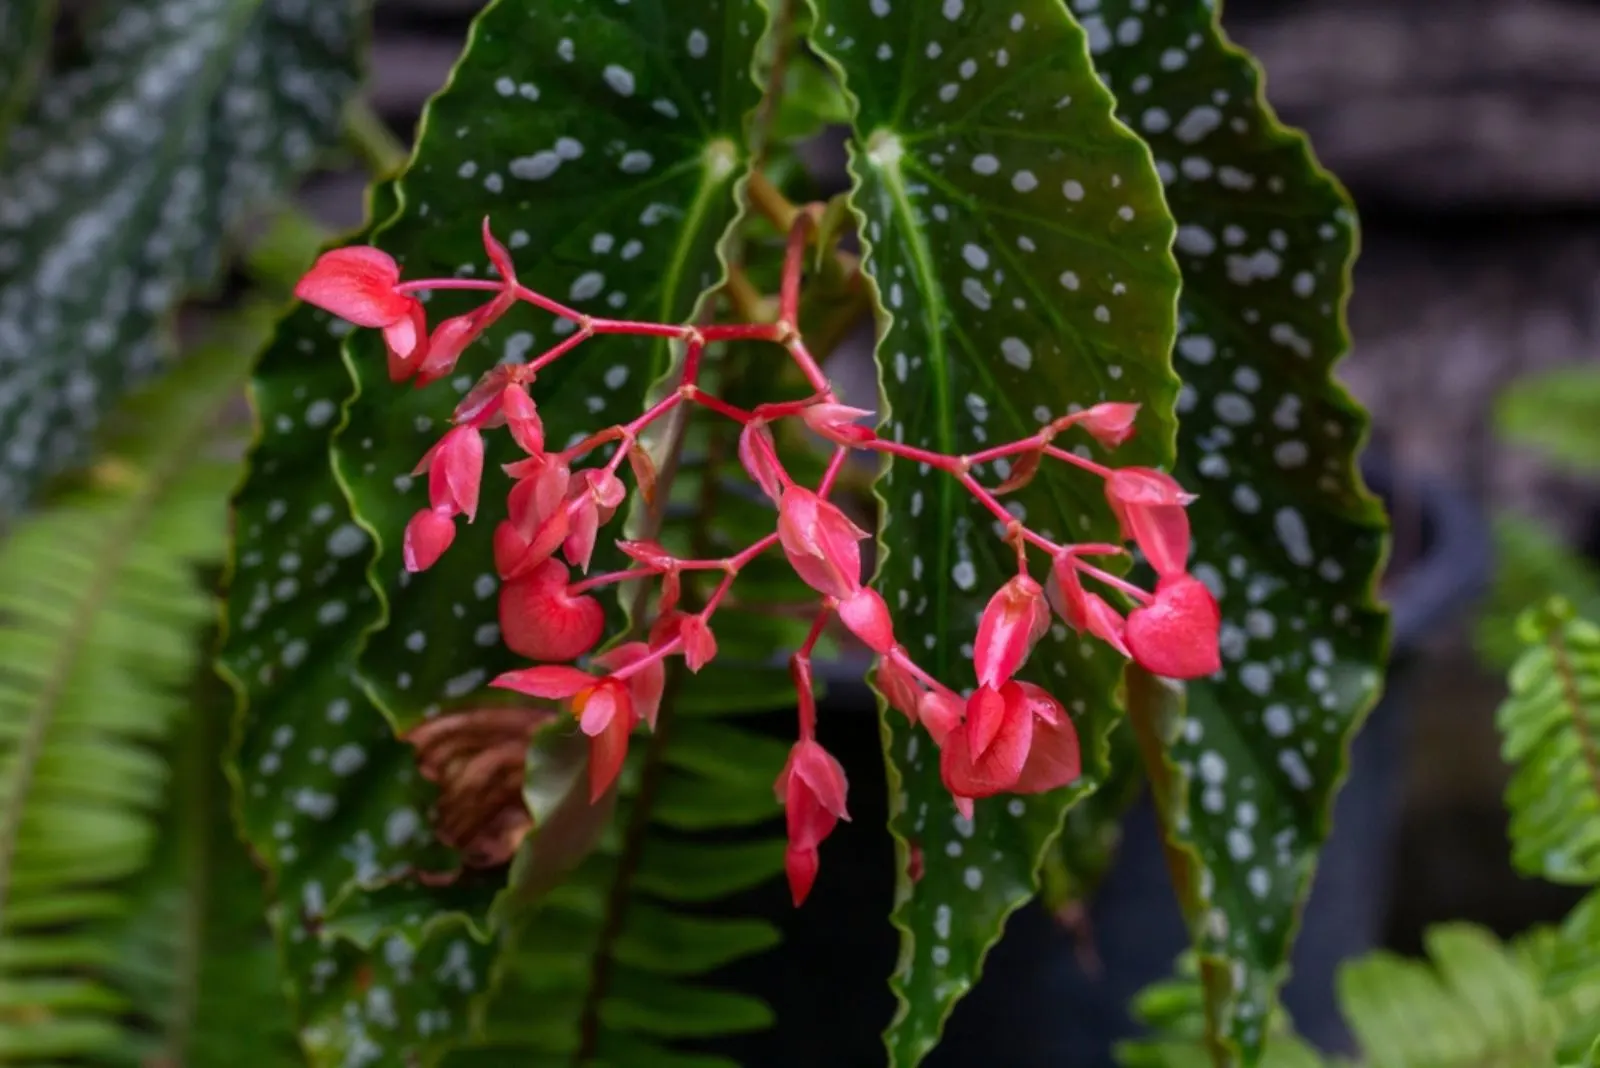 Red flower and white spots on the leaves of Angel Wing Begonia